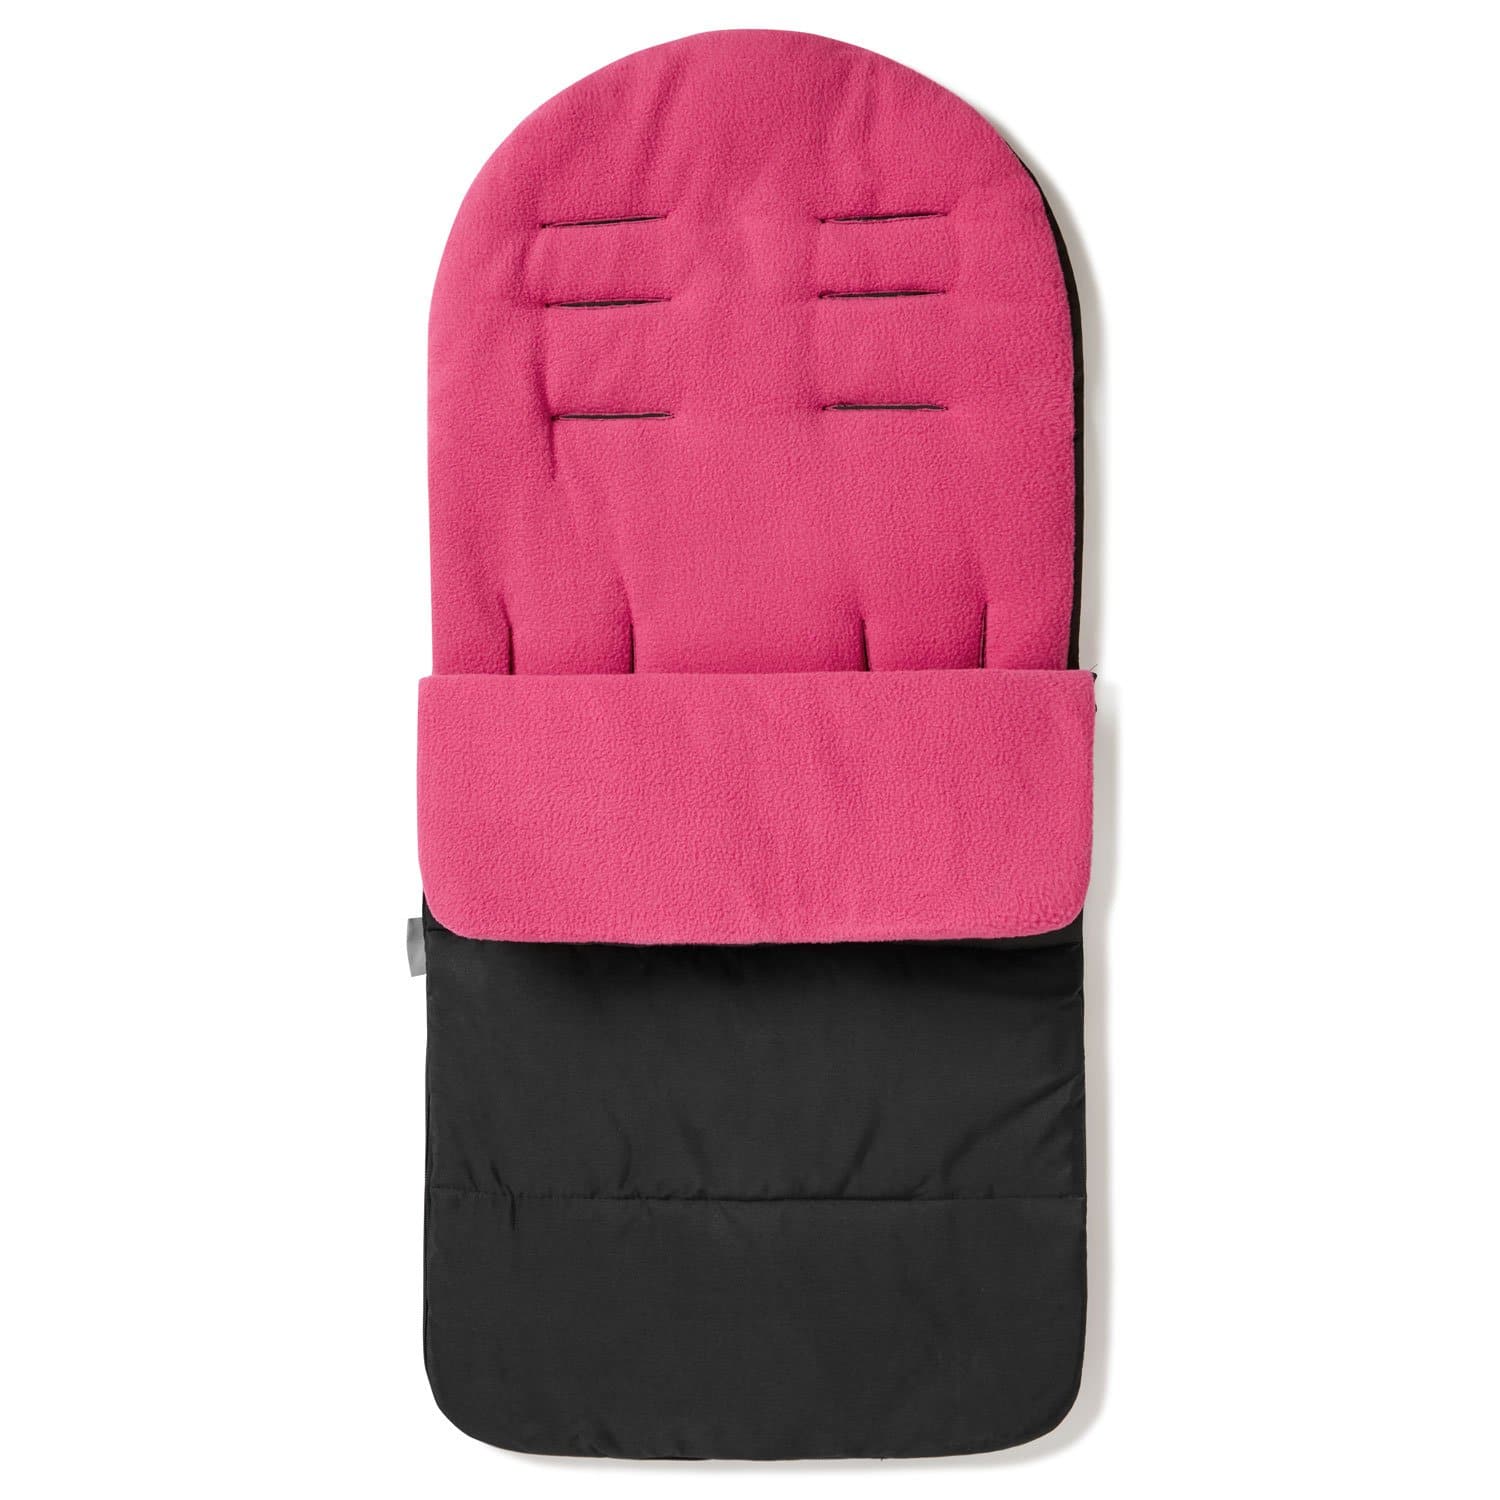 Premium Footmuff / Cosy Toes Compatible with Red Castle - Pink Rose / Fits All Models | For Your Little One